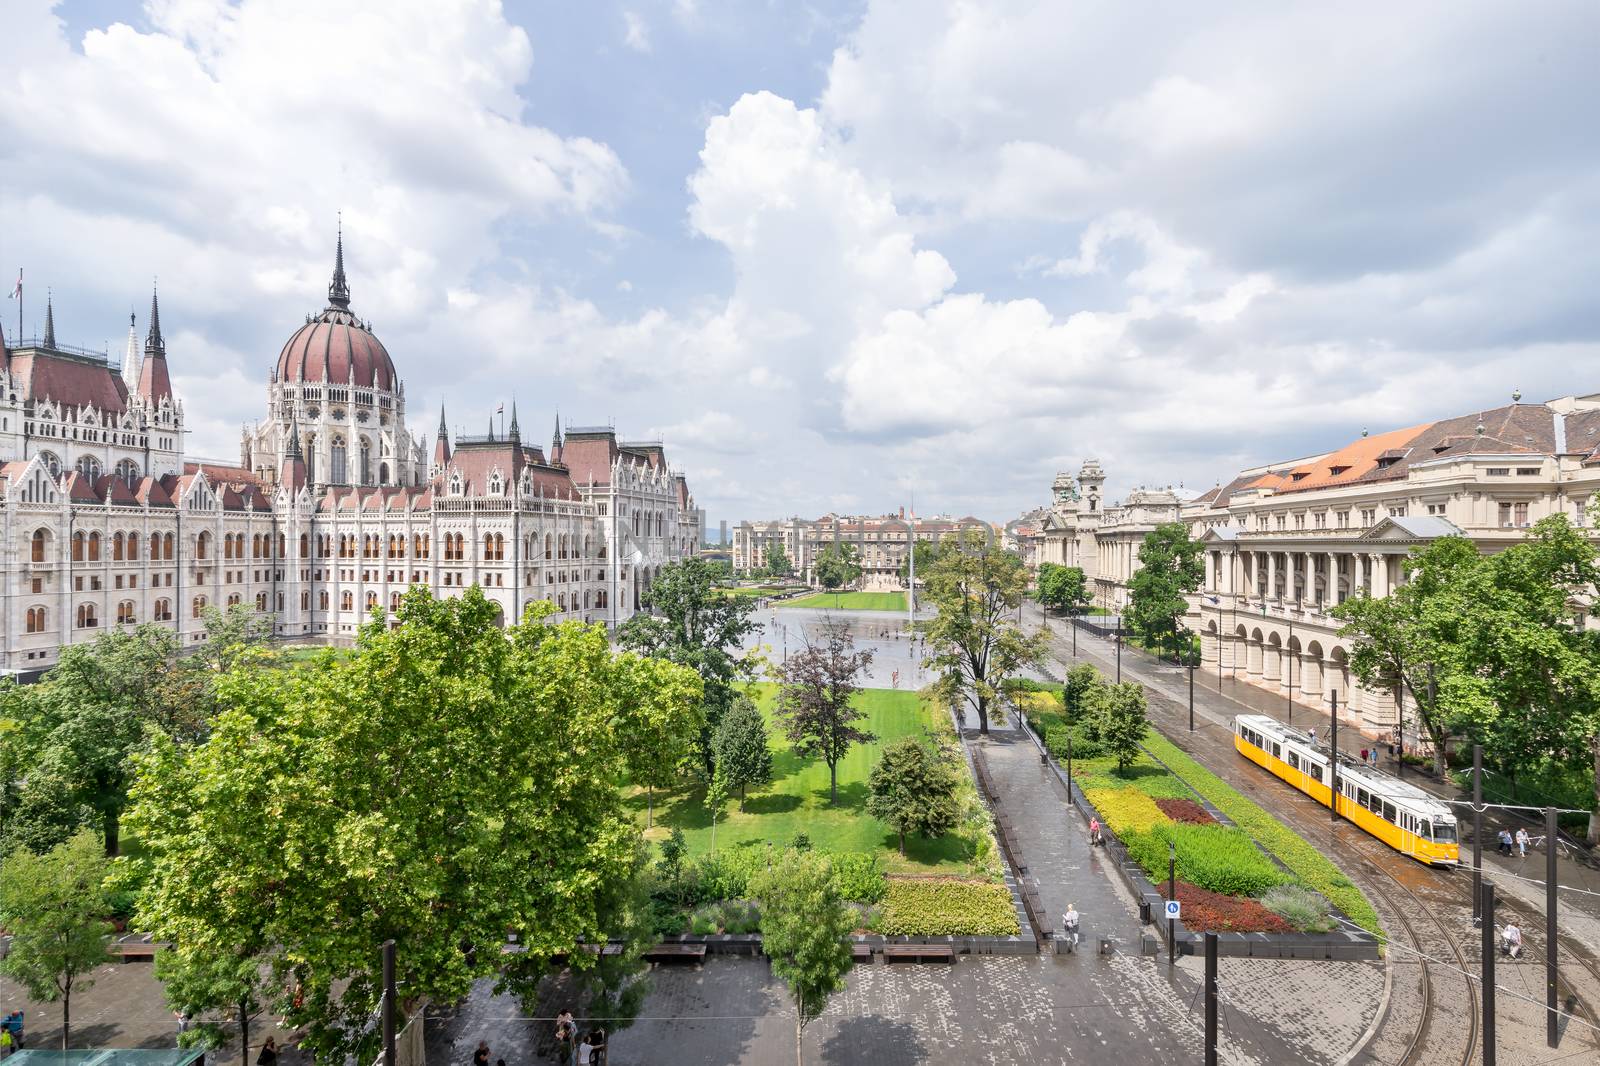 Hungarian parliament building from behind and yellow vintage tram passing by on a sunny day in summer season in Budapest, Hungary - aerial view. by tamas_gabor